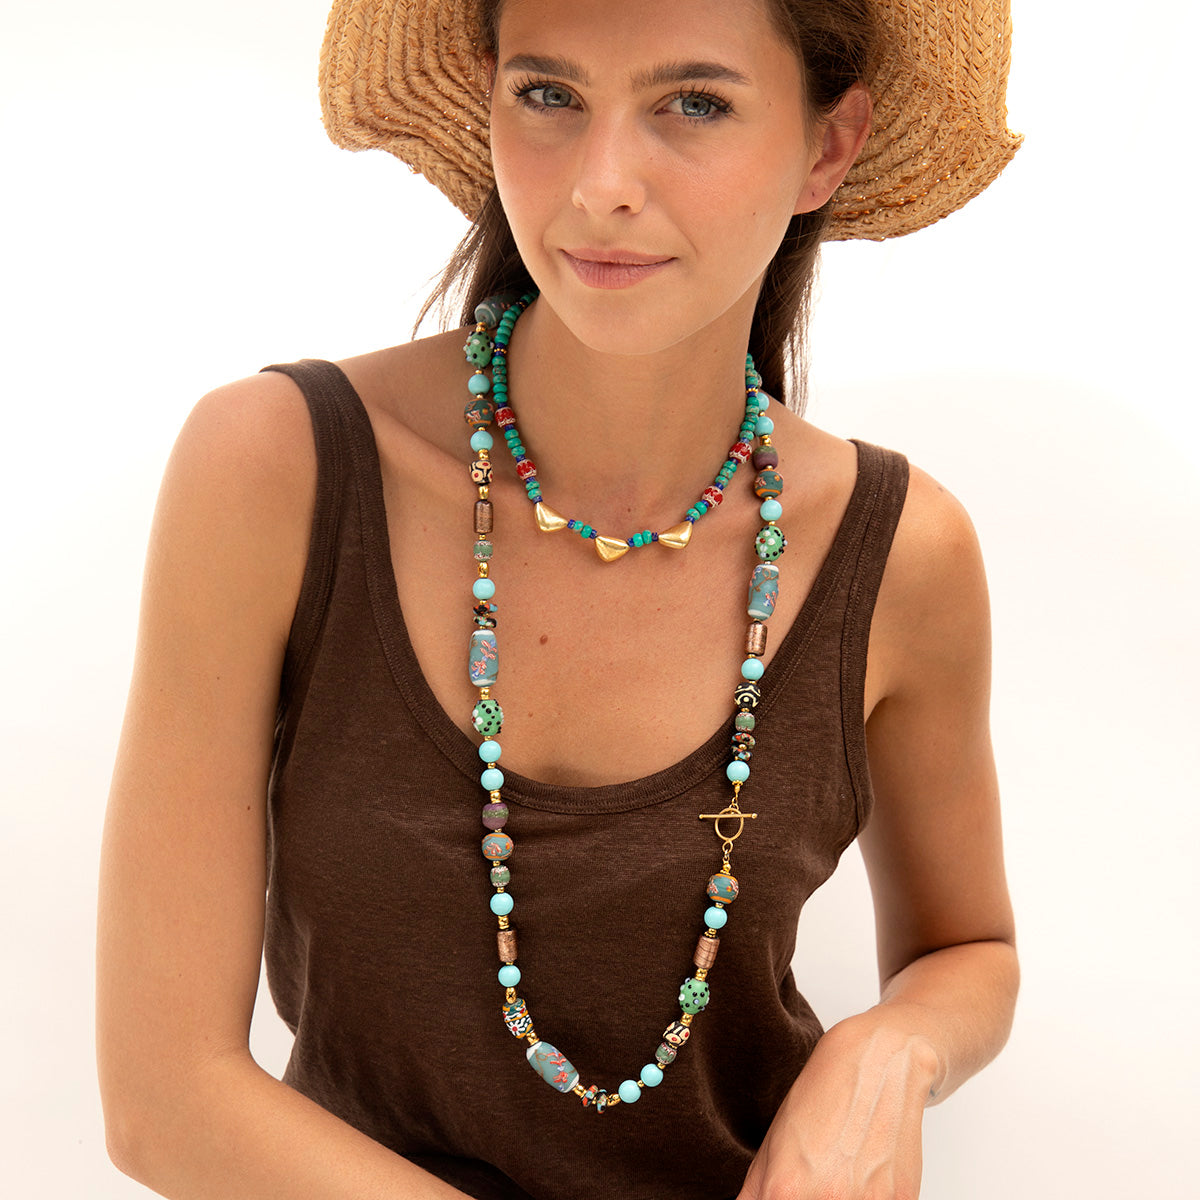 Women's Designer Beaded Necklace : LOVE2HAVE in the UK!